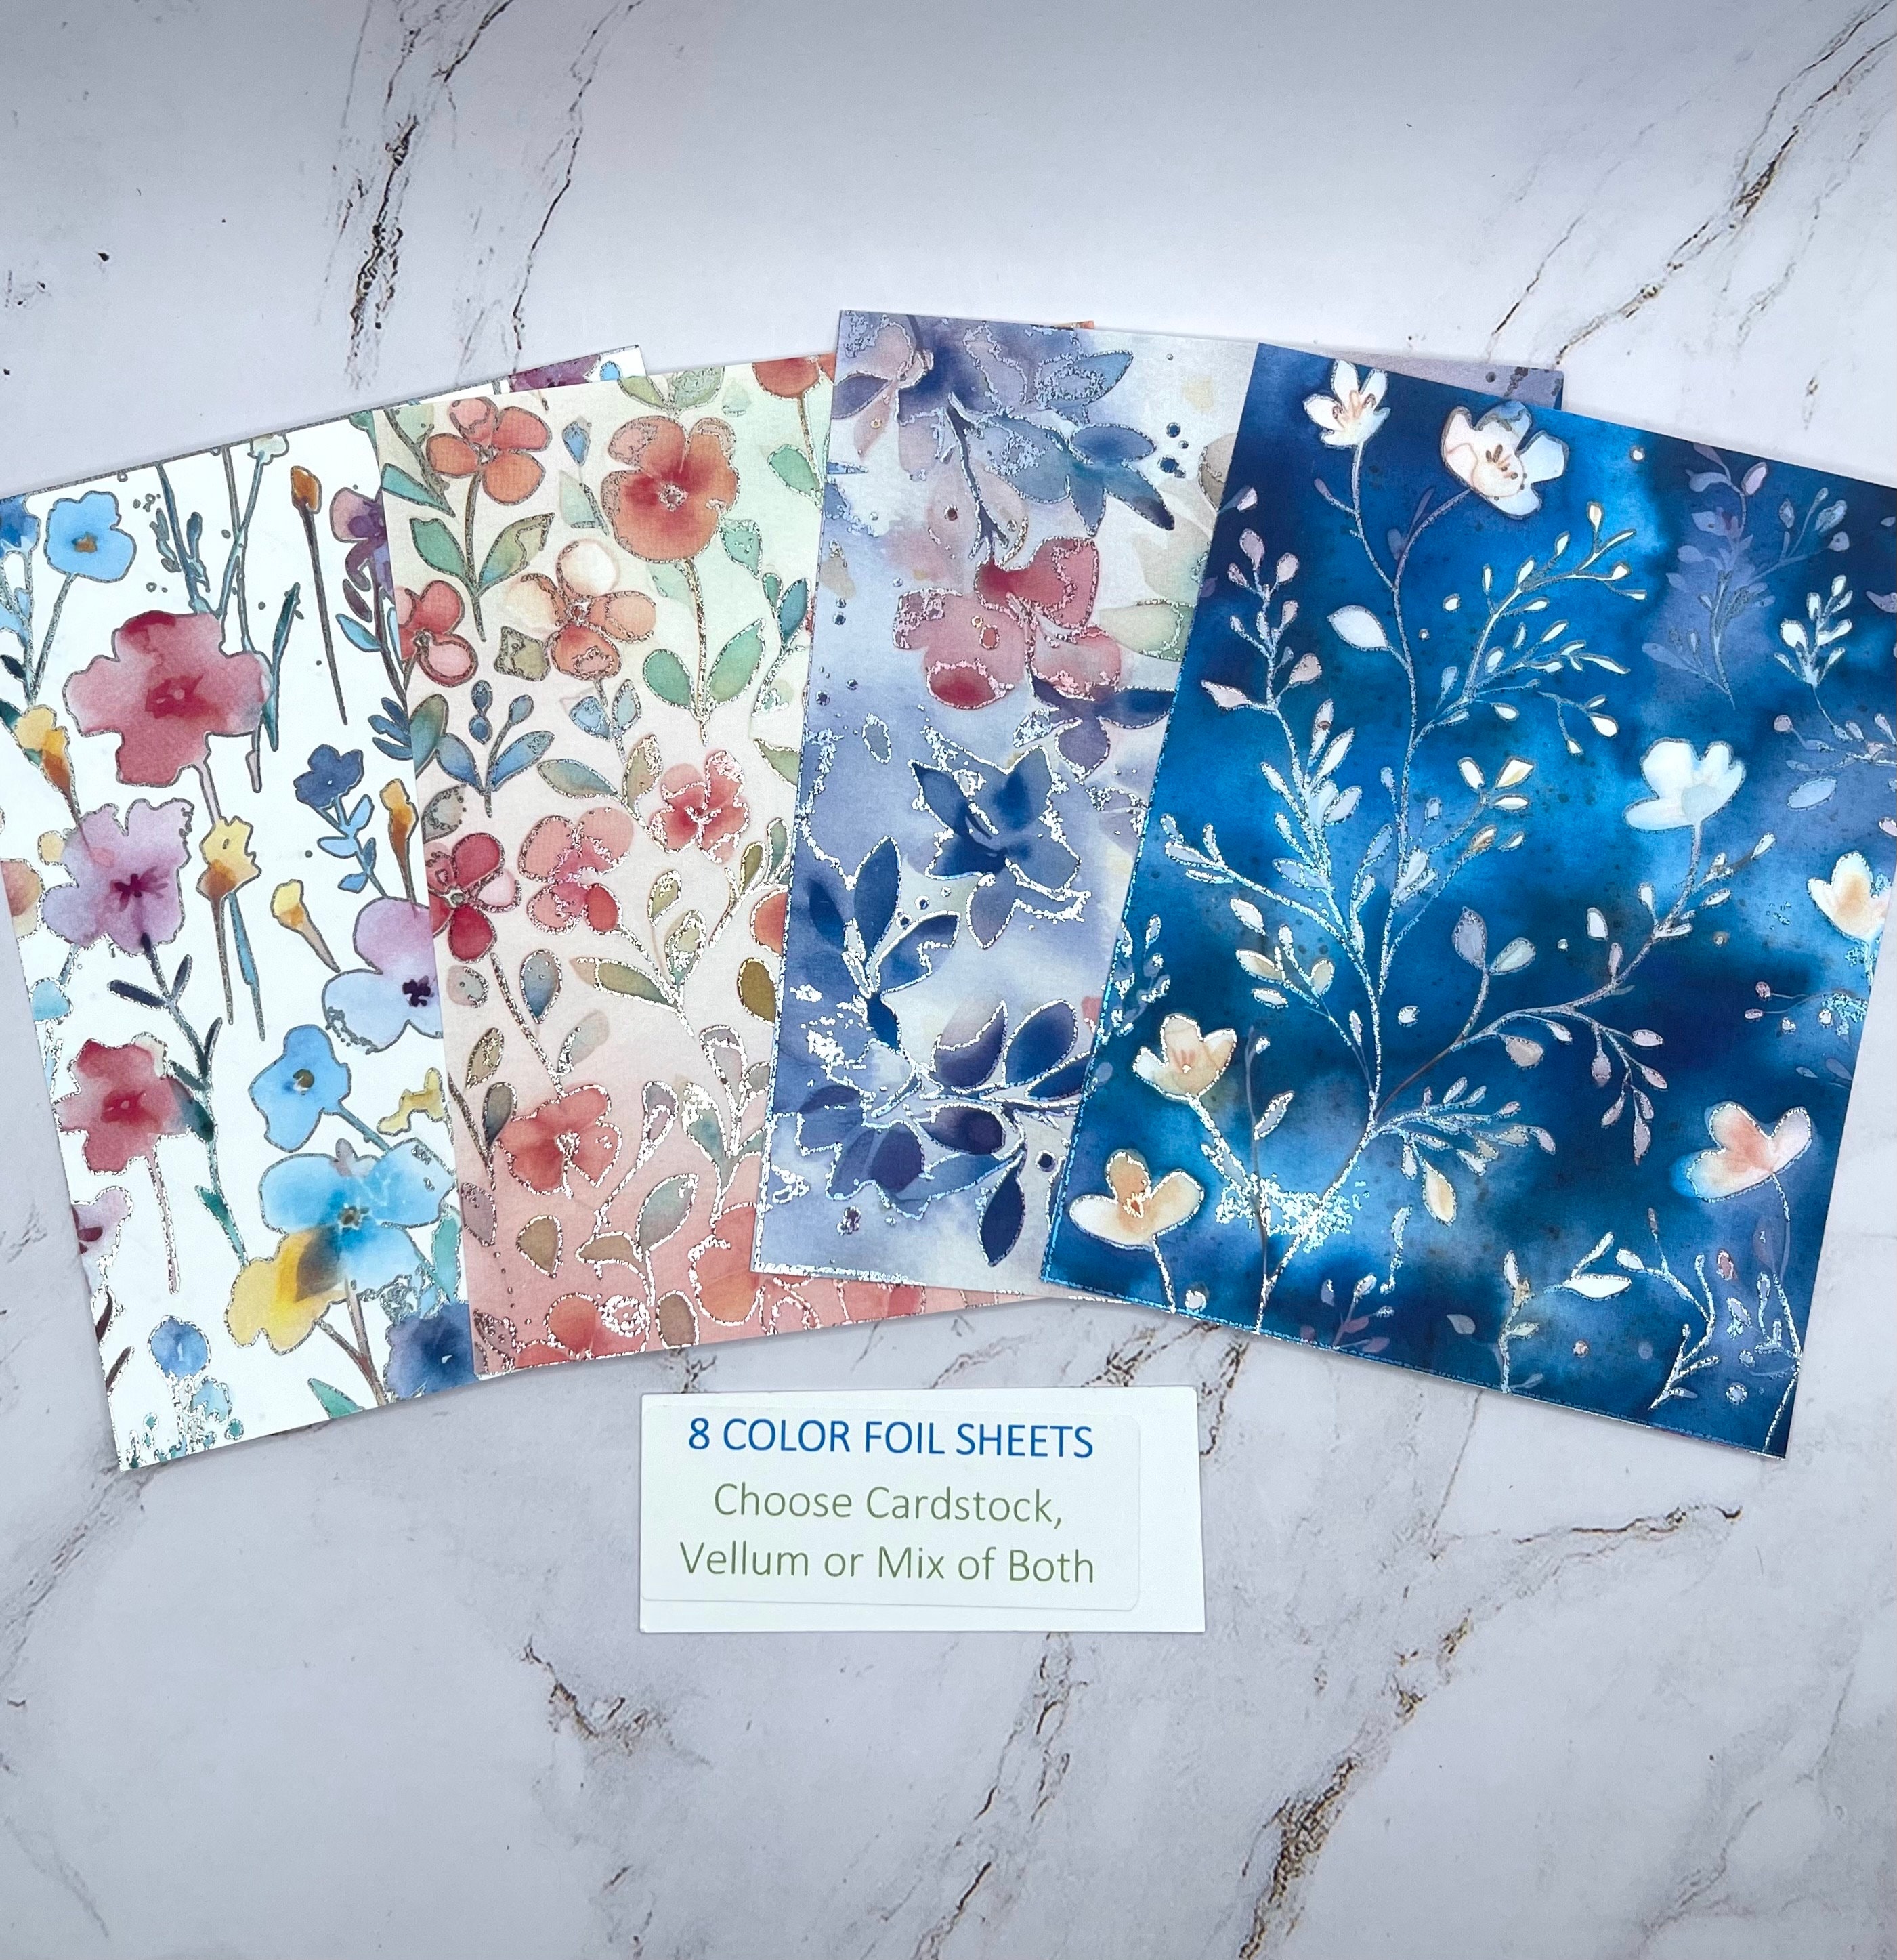 SALE!! 8.5 x 11 CARDSTOCK PAPER - FLORAL COLORS #3 - LOT OF 10 - NEW!!